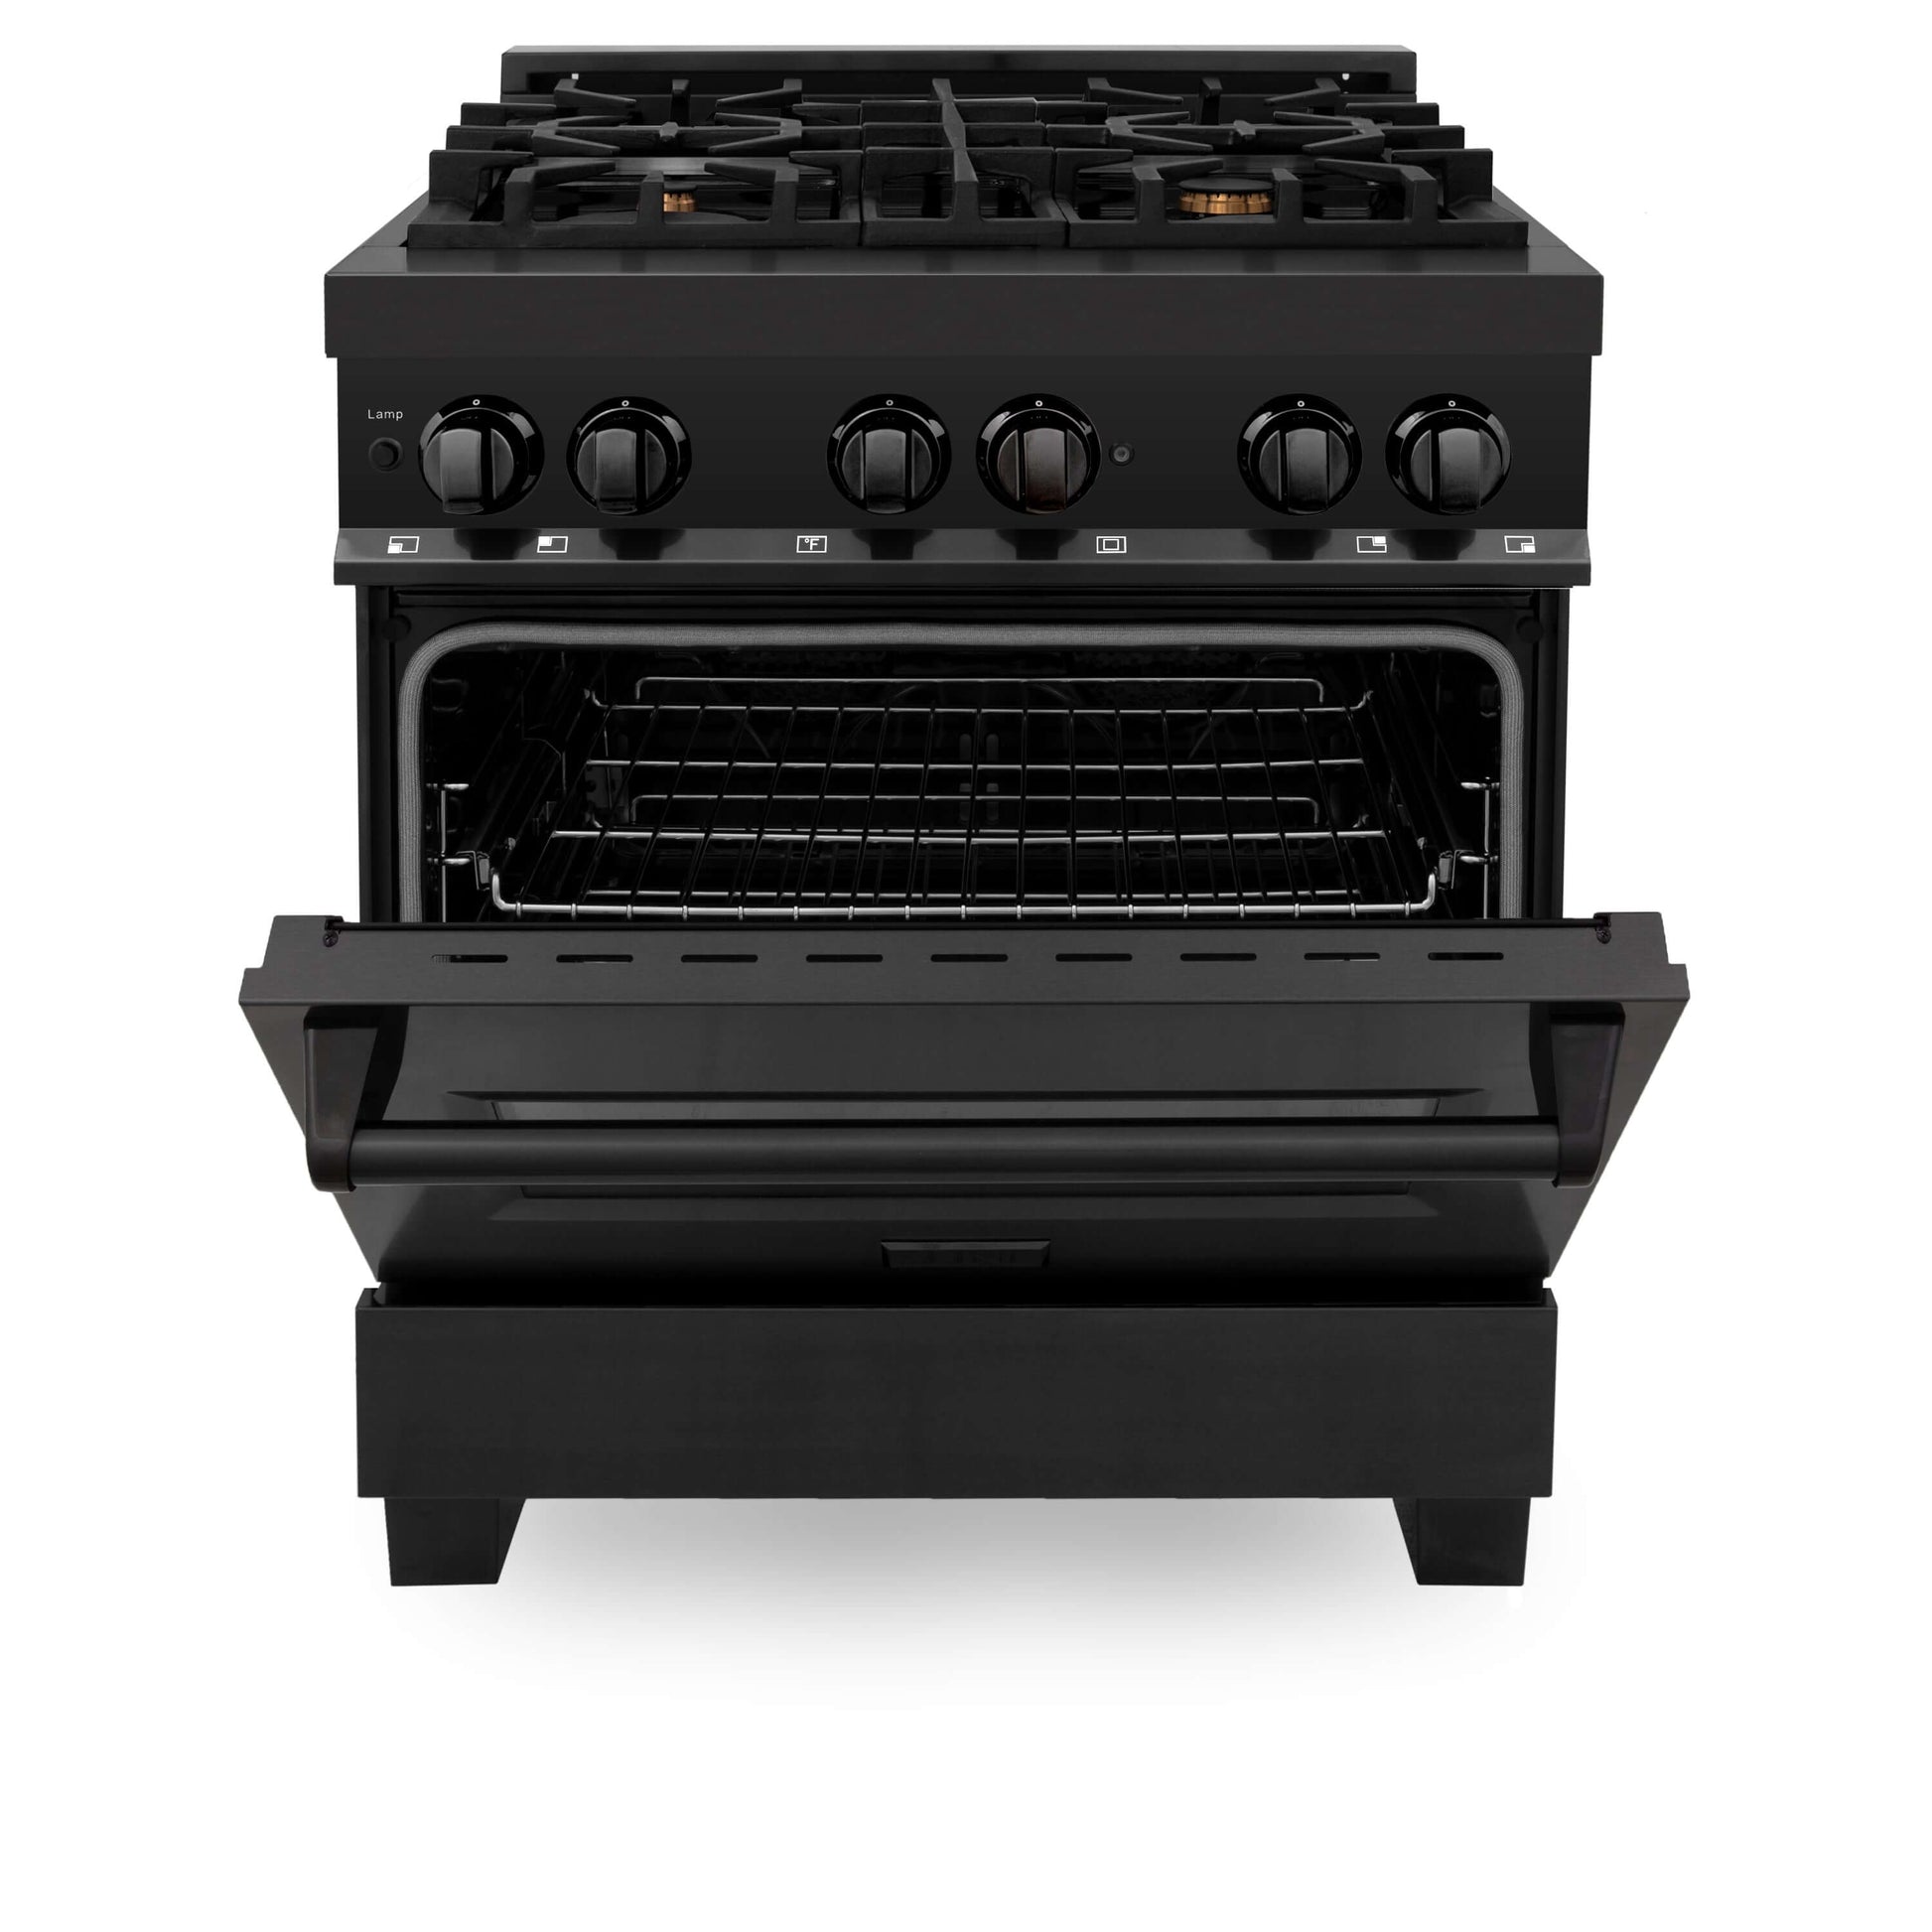 ZLINE 30" Dual Fuel Range with Gas Stove and Electric Oven - Black Stainless Steel with Brass Burners